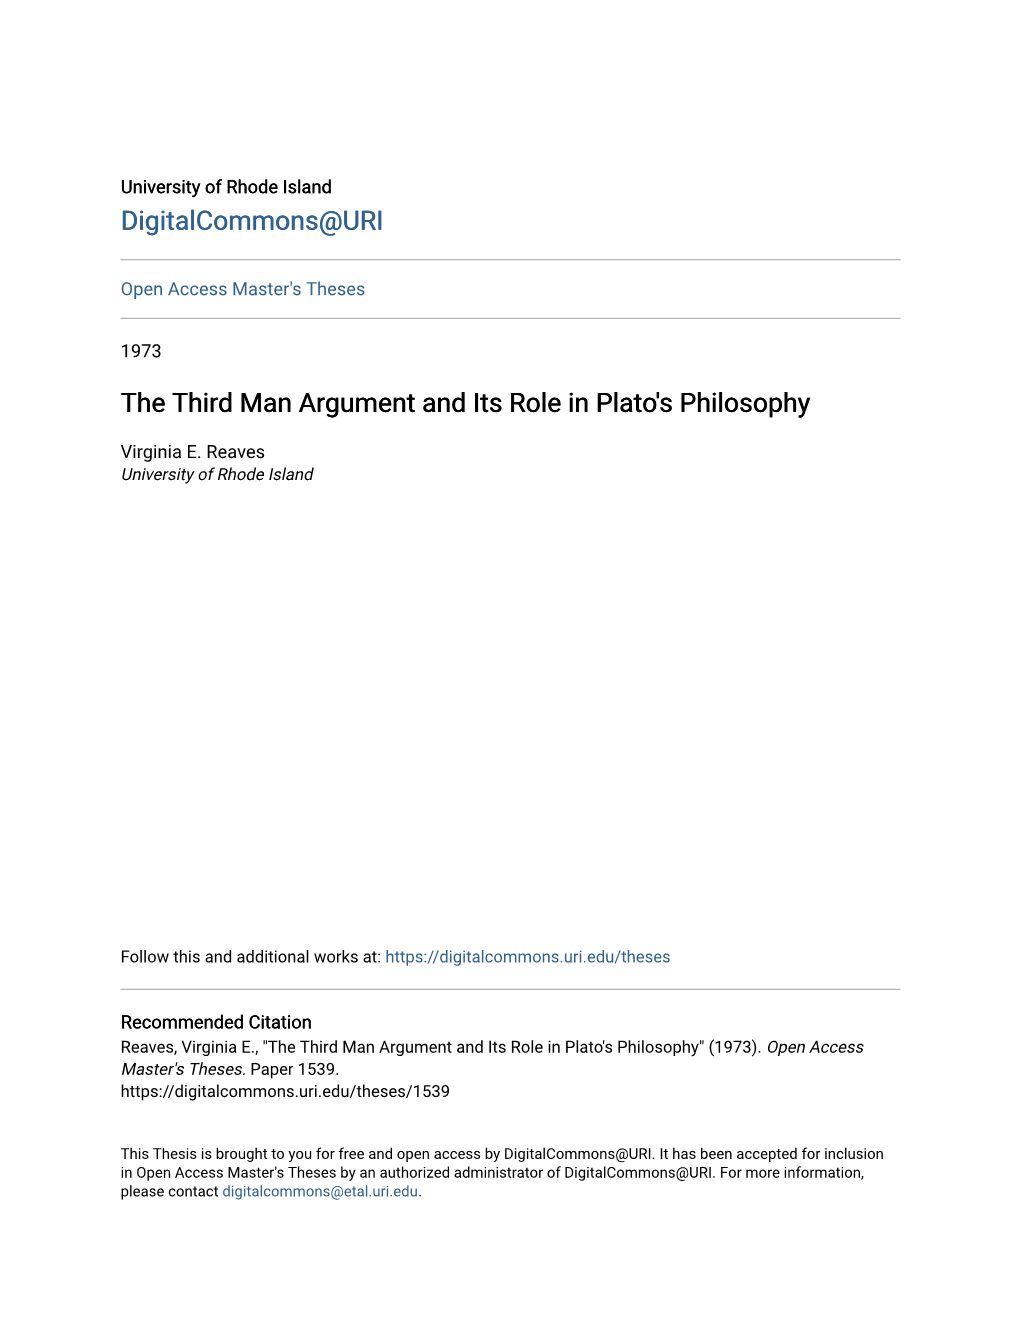 The Third Man Argument and Its Role in Plato's Philosophy